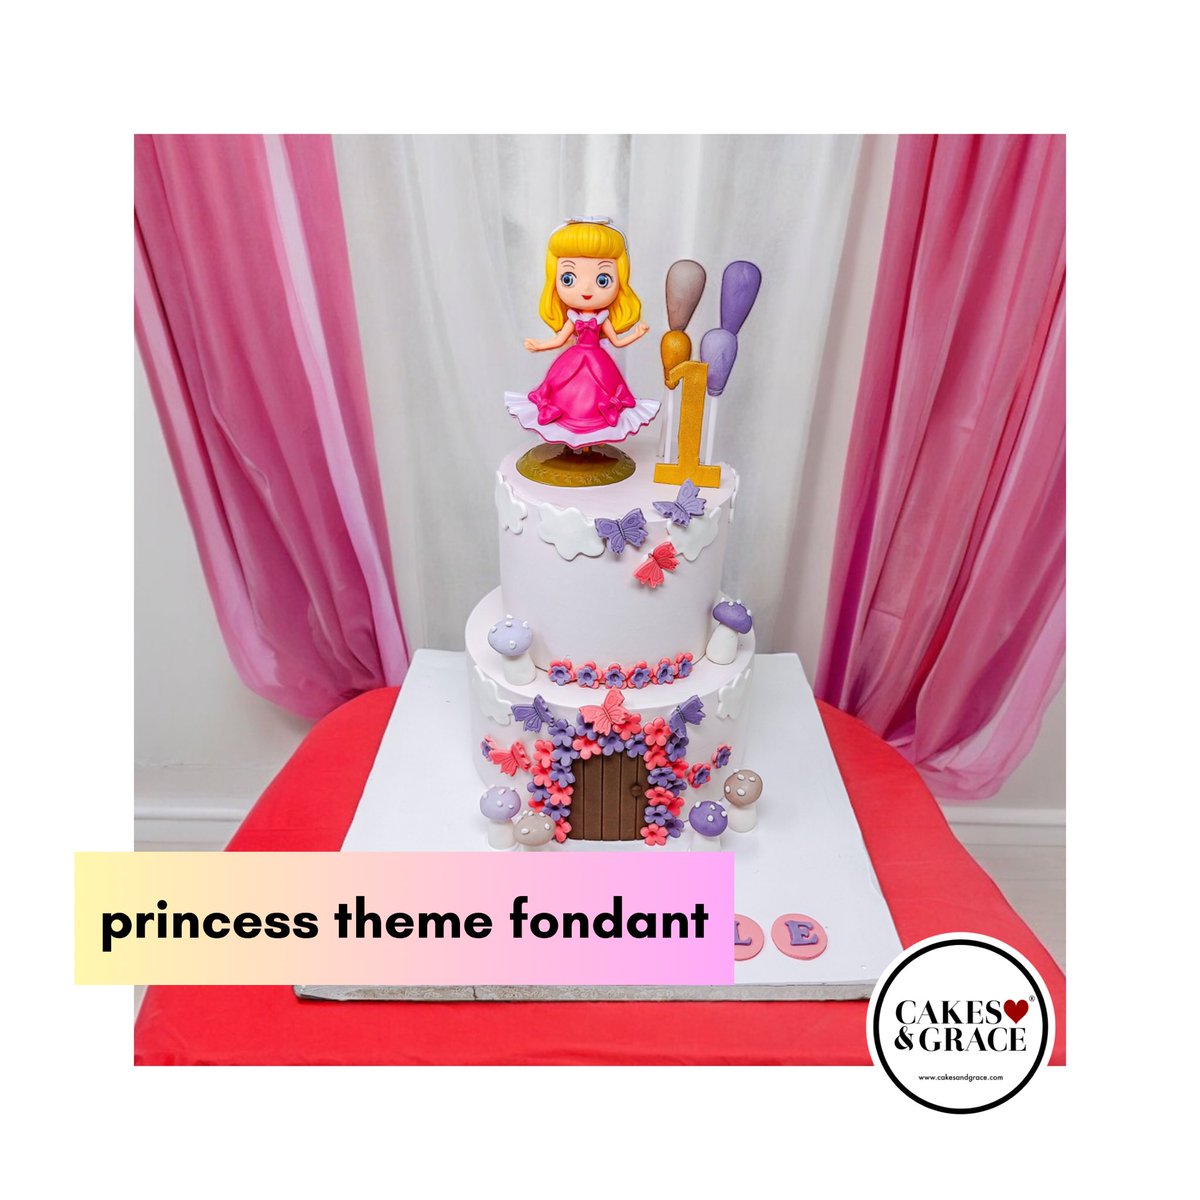 👸🏻🍰
Raising the bar on sweetness and sophistication, this princess-themed fondant cake reigns supreme in taste and style!
—
Get your imagination designed only at @cakesandgracein
—
☎️: +91 9040 506 506
🛍: cakesandgrace.com
—
#spreadlove #cakesandgrace
#princesscake